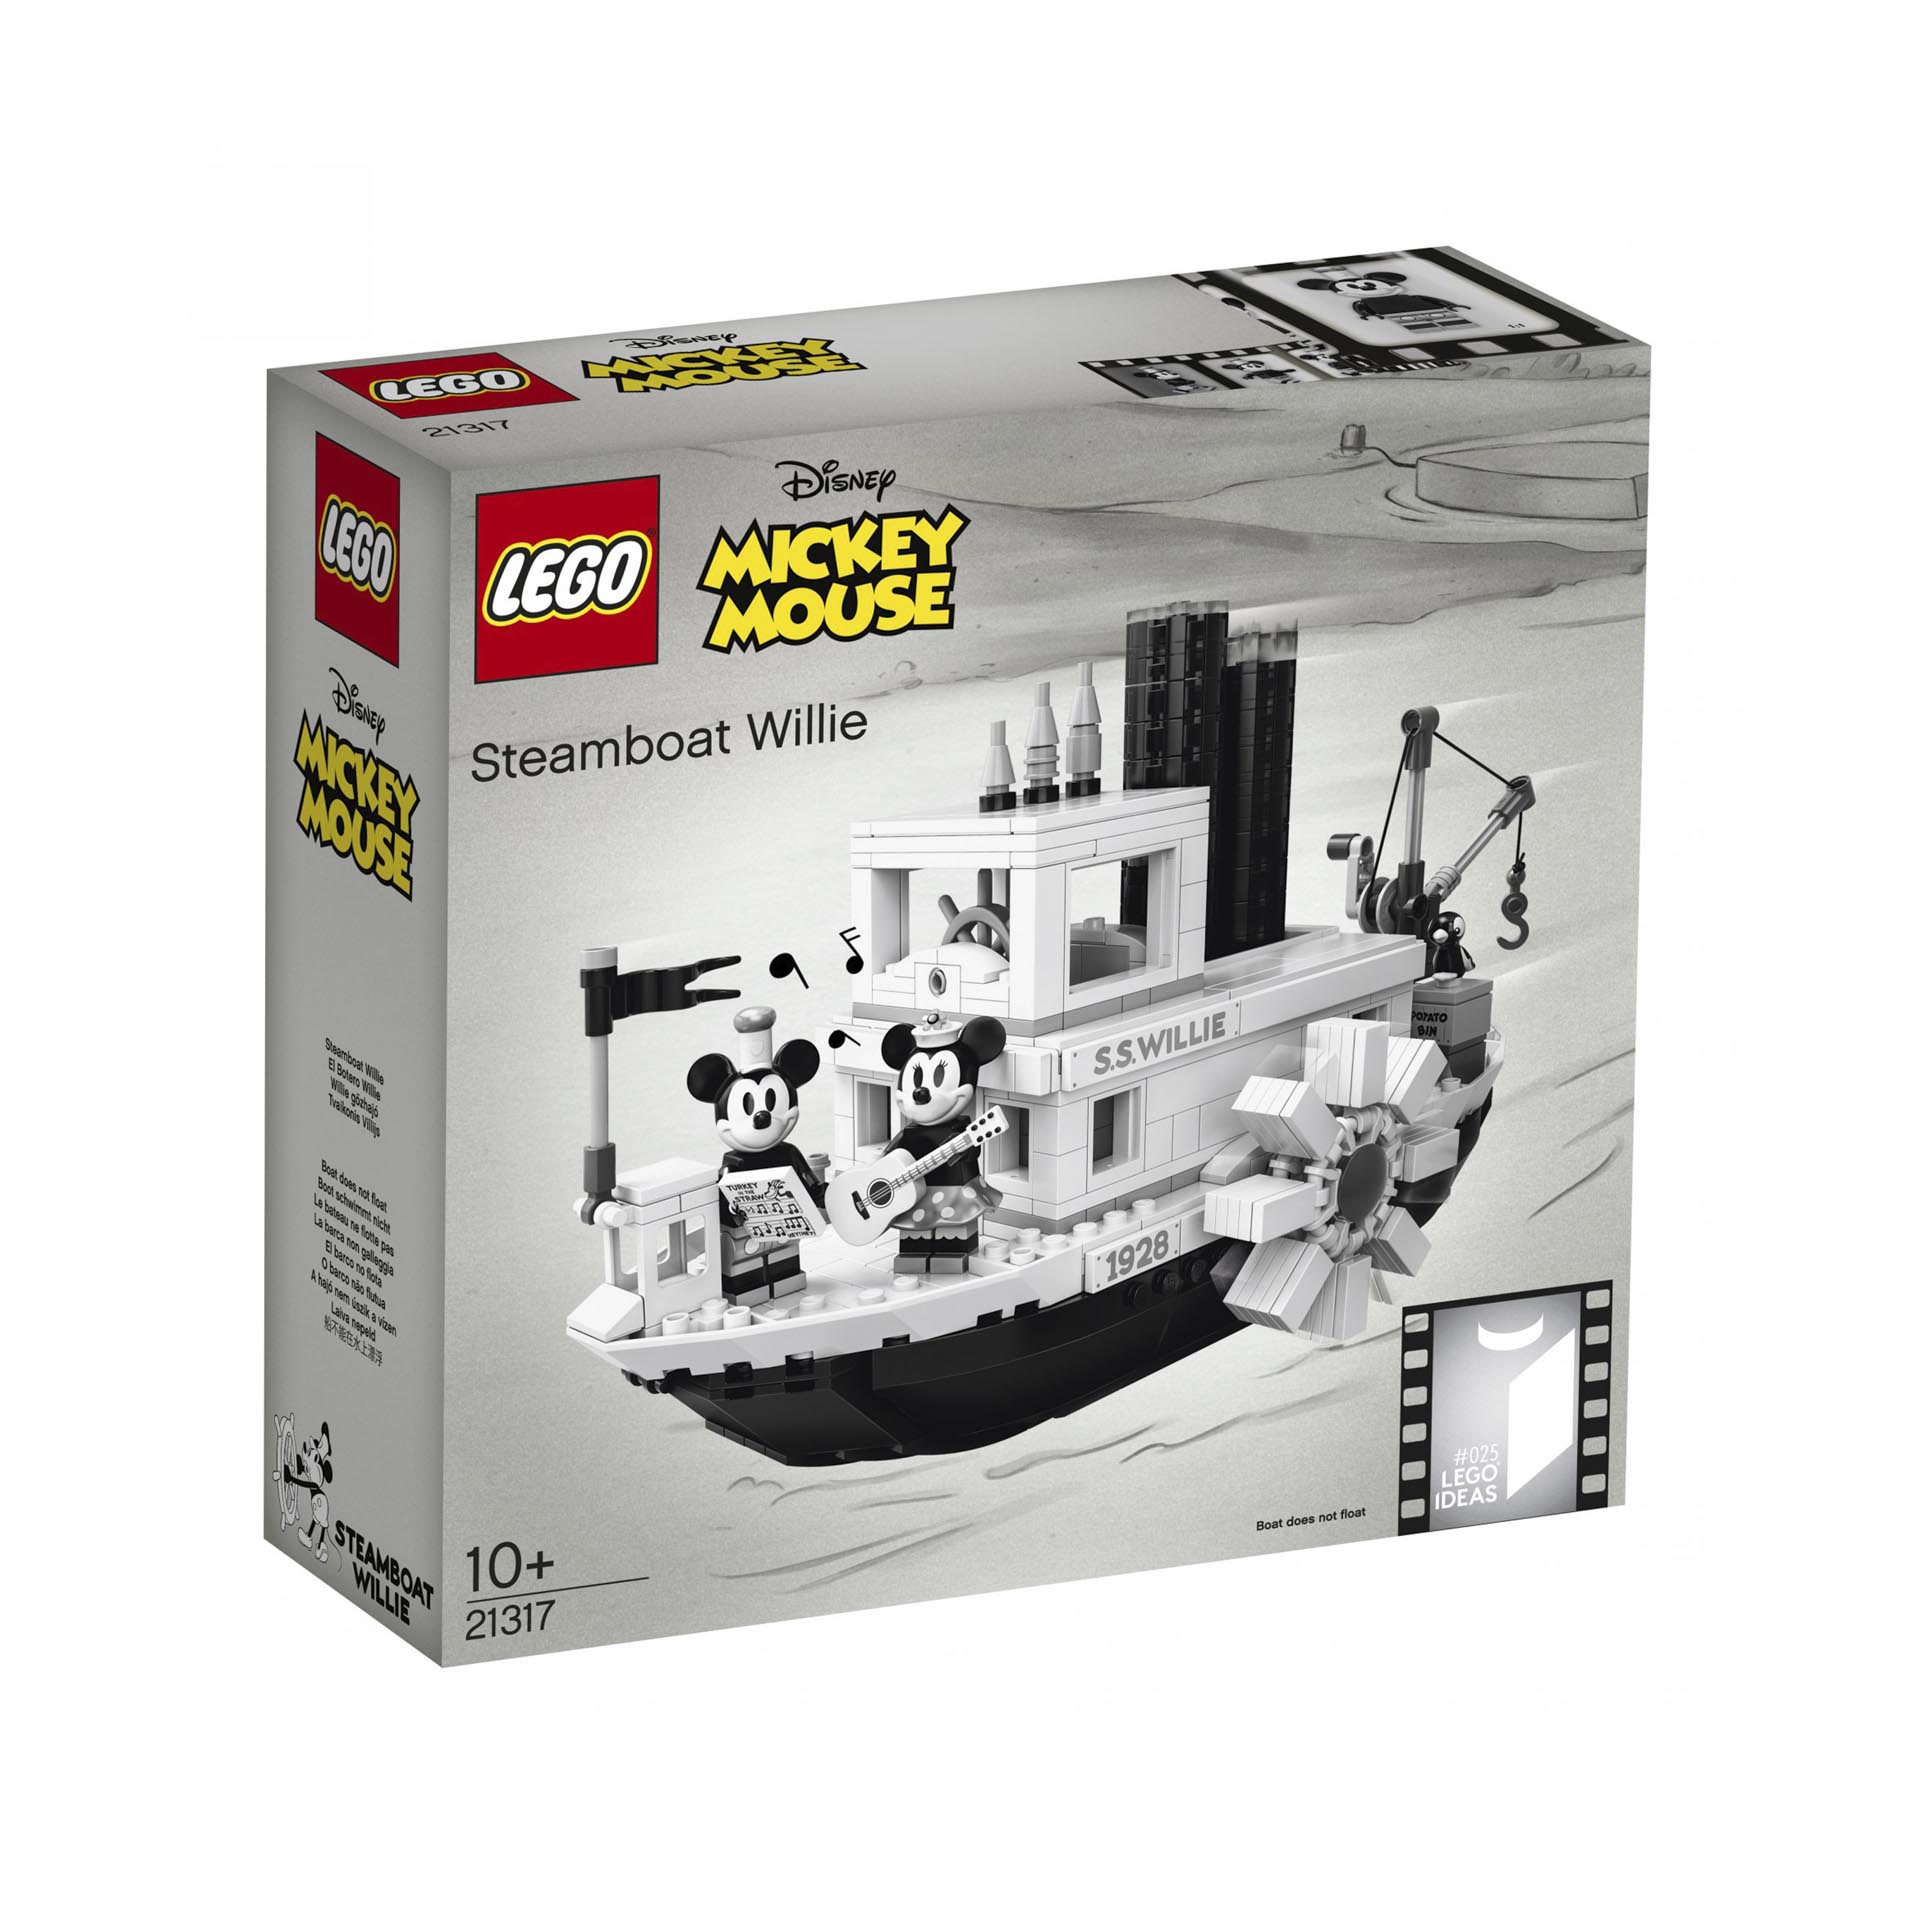 Steamboat Willie 21317, , large